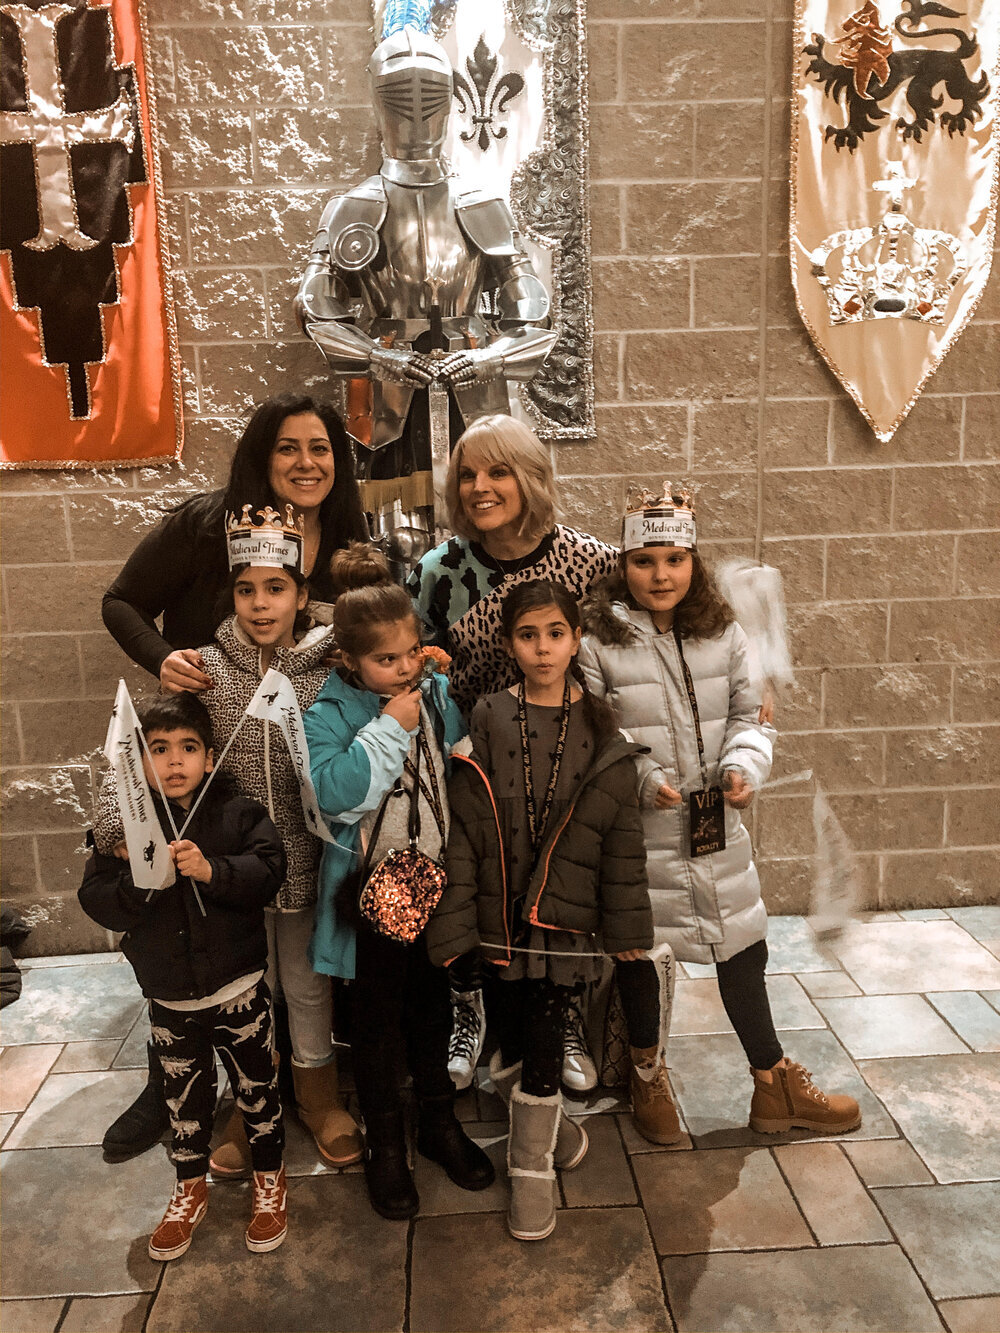 Family night at Medieval Times. &lt;5 reasons why you should do it!&gt;